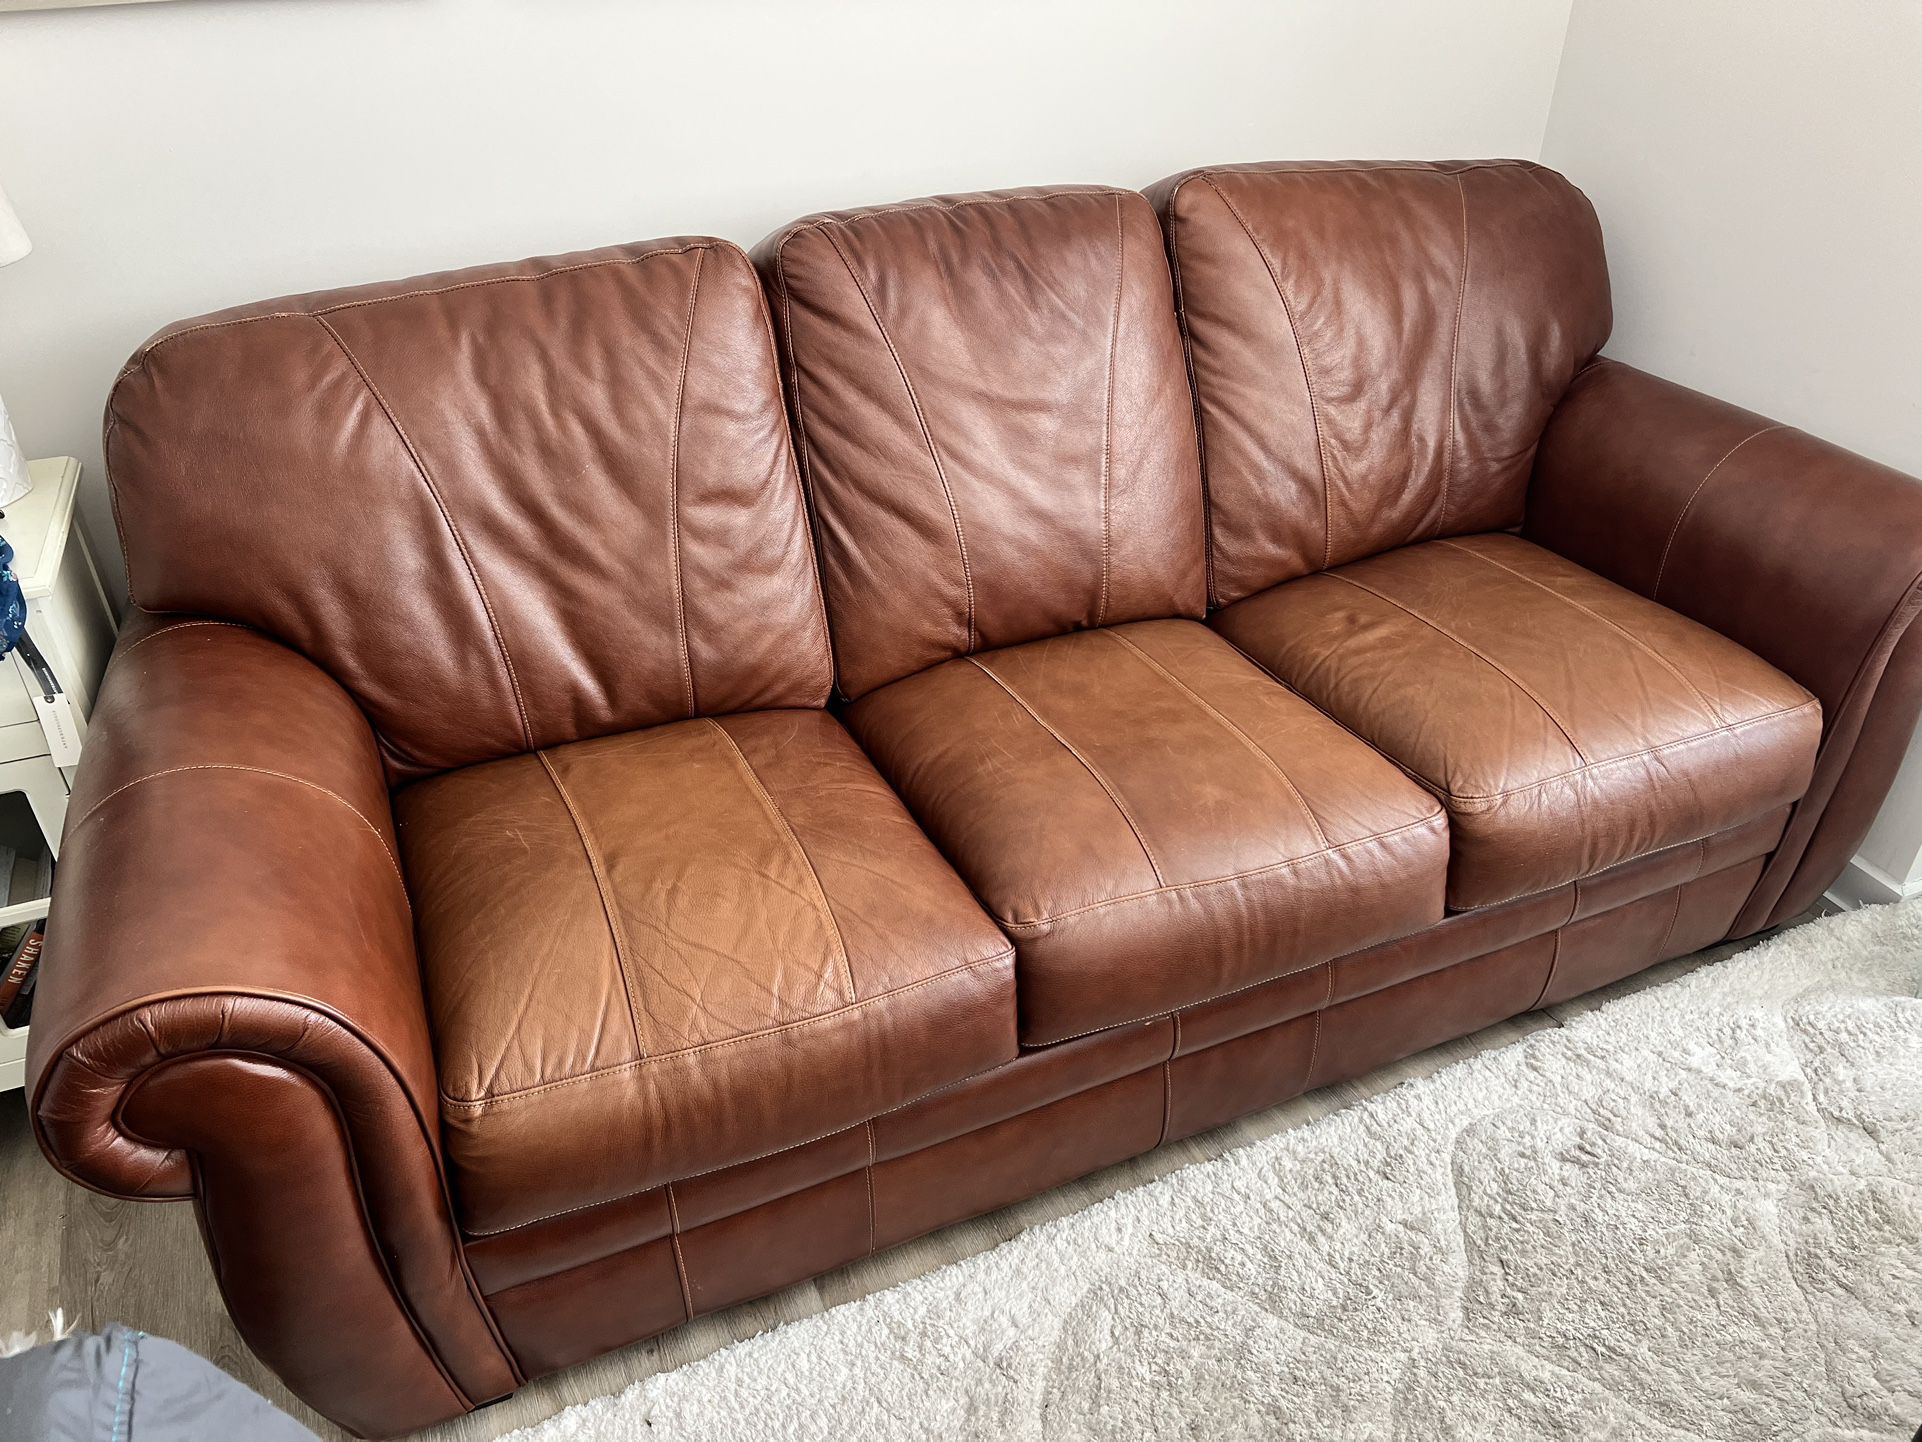 Brown Leather Couch - Pullout Bed